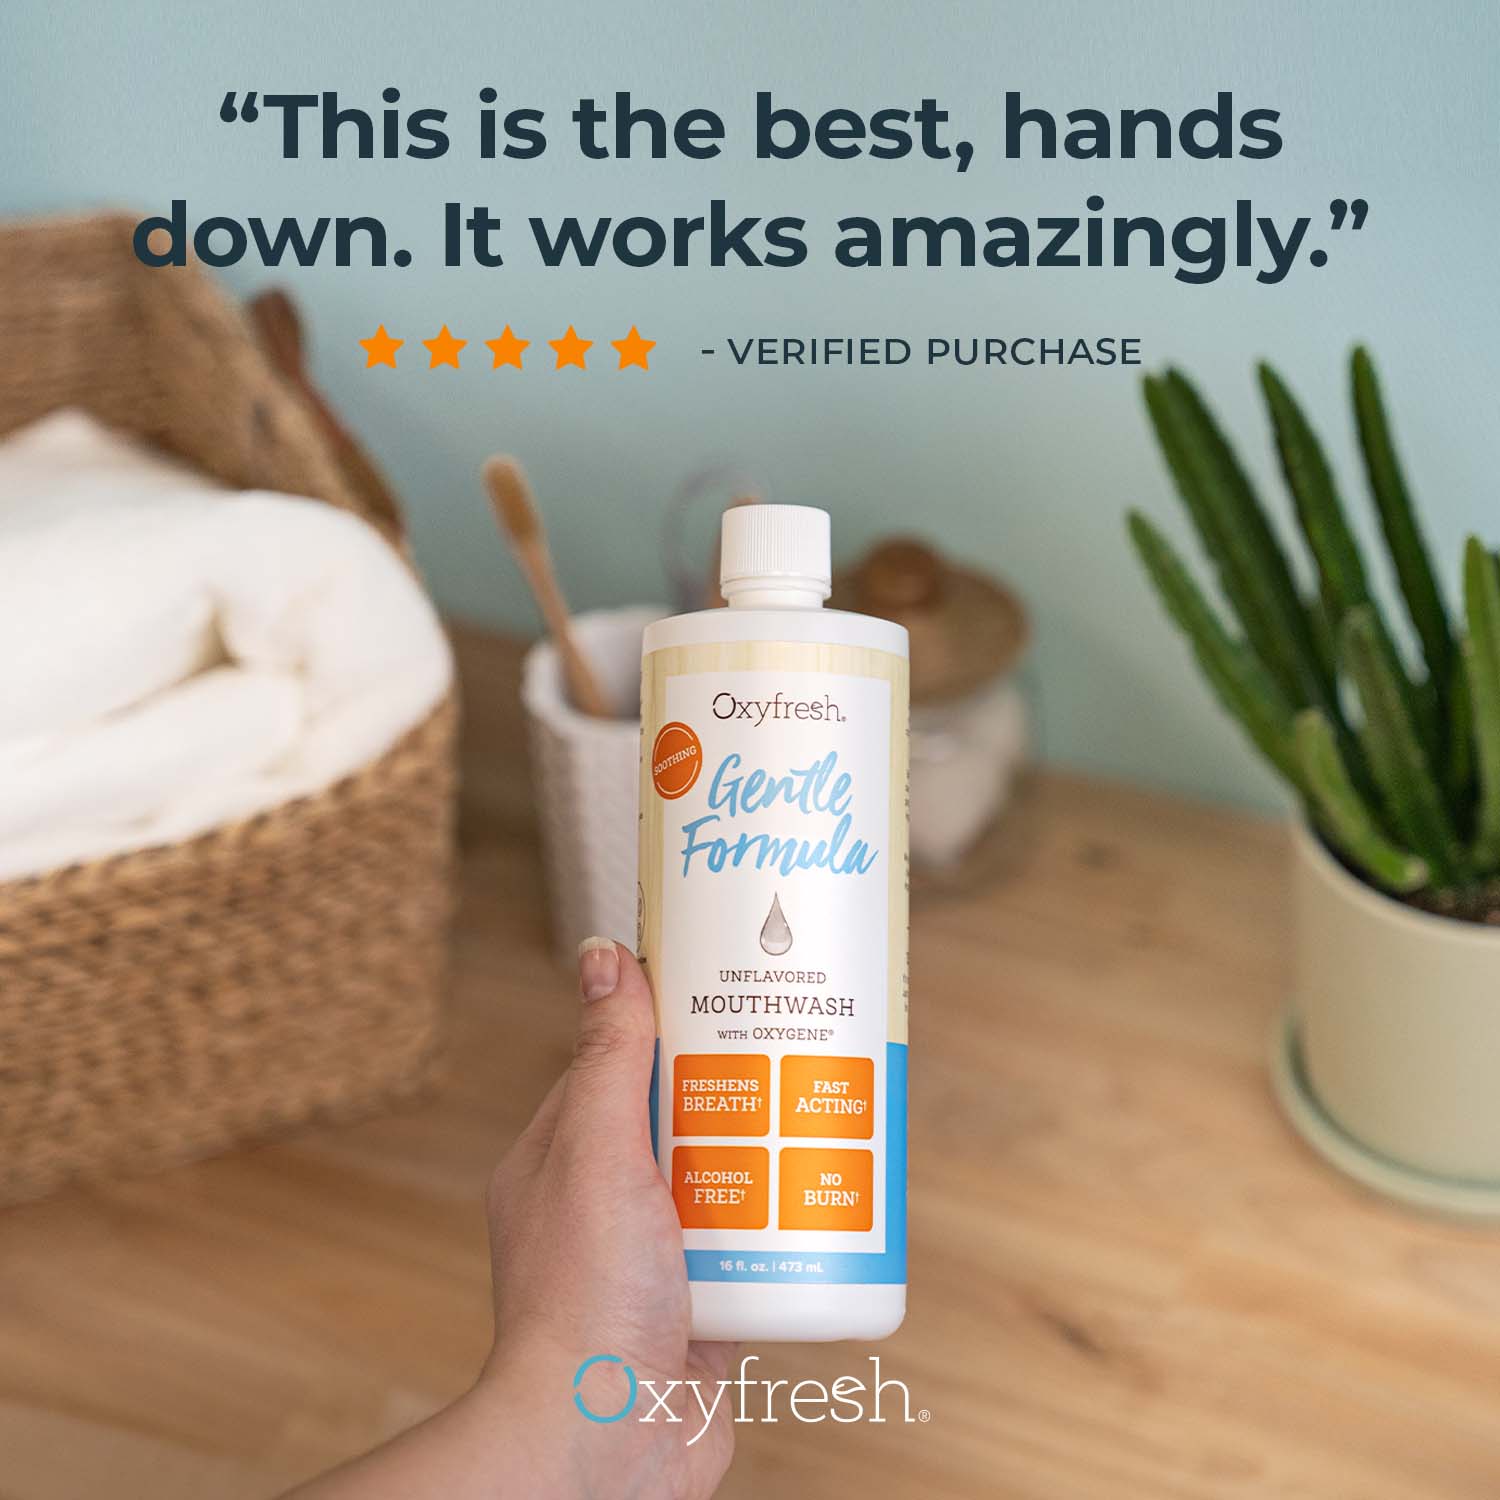 oxyfresh-gentle-formula-mouthwash-review-"This-is-the-best,-hands-down.-It-works-amazingly."